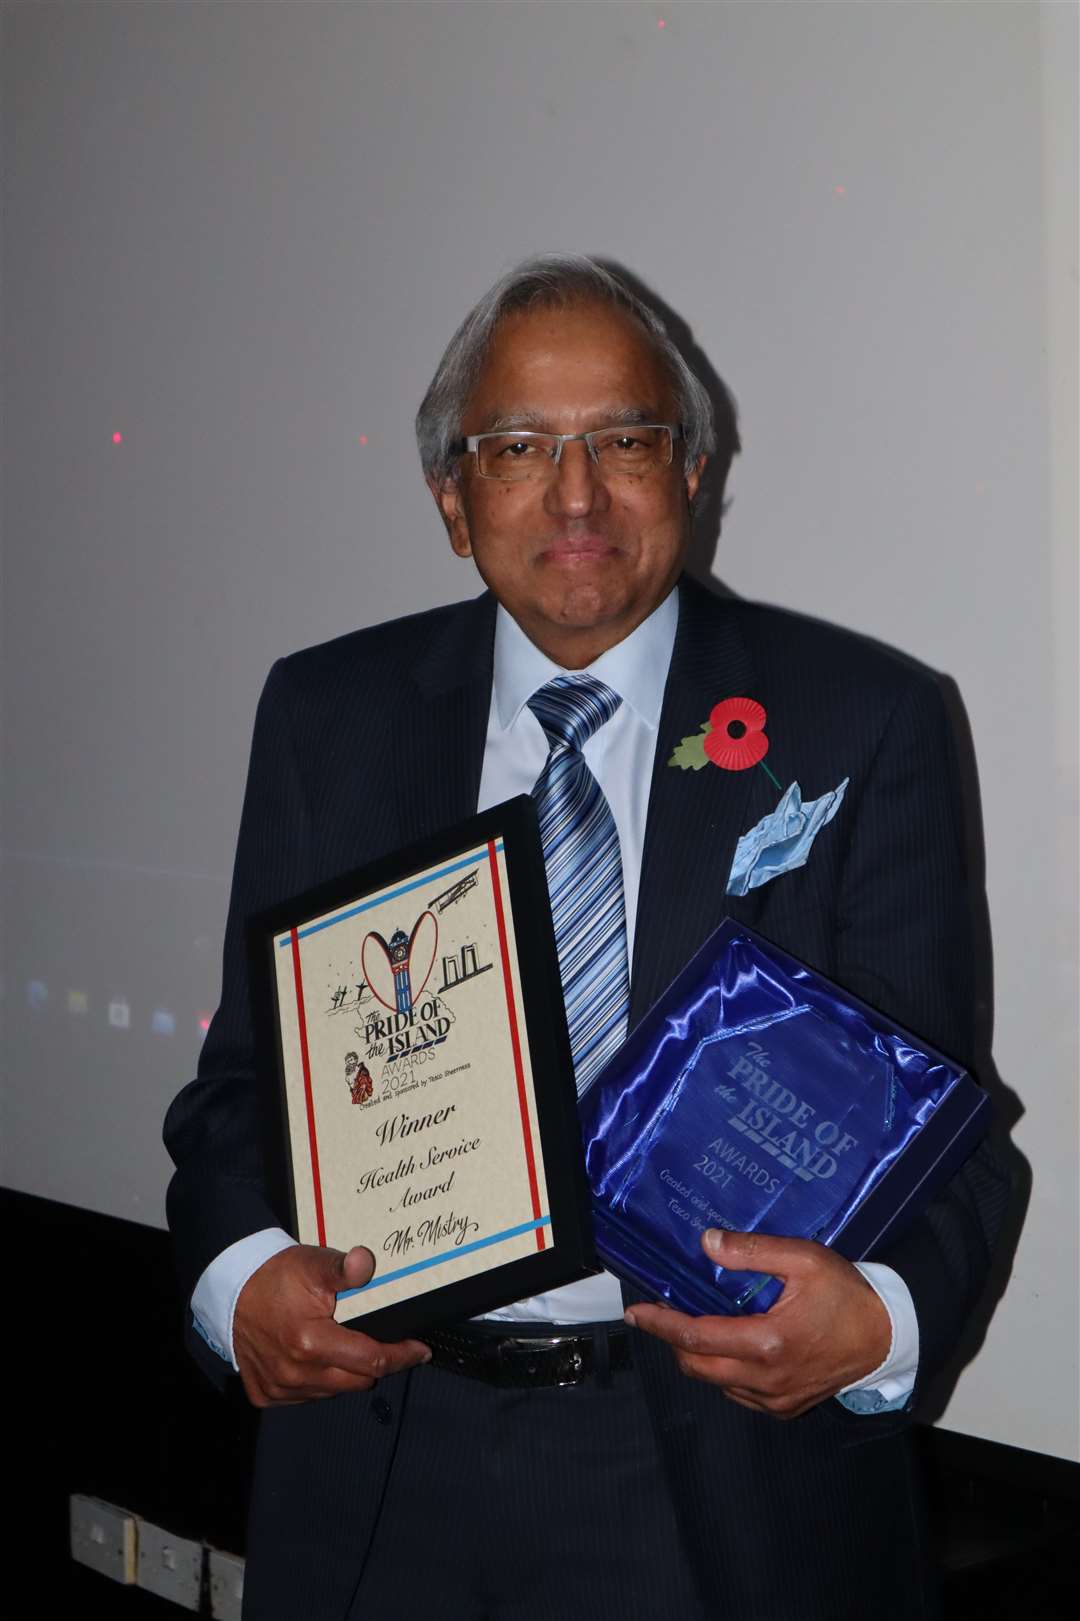 Pharmacist Manu Mistry was named health service winner in the Tesco Pride of the Island awards